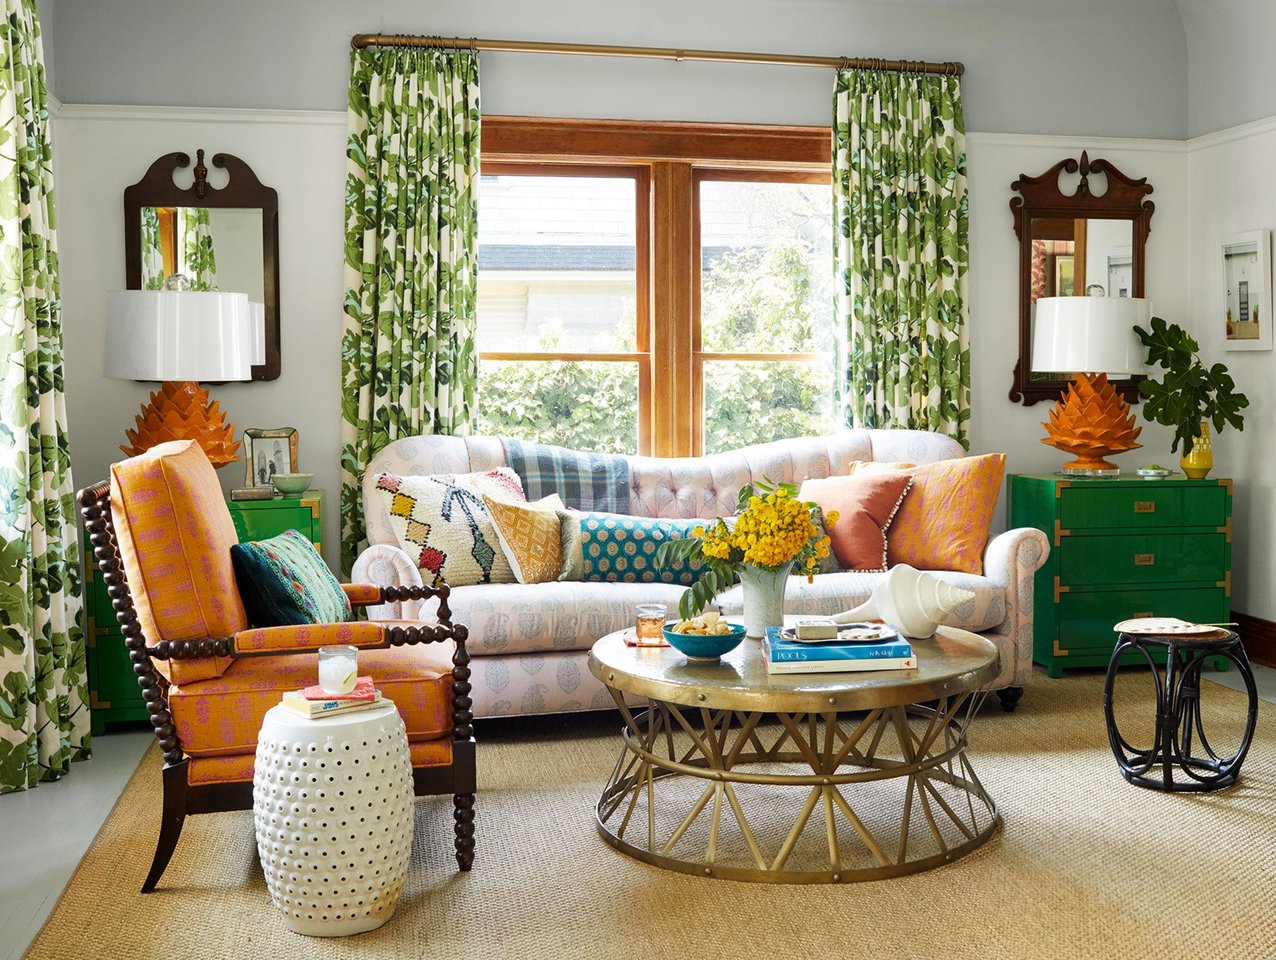 This 1904 Craftsman Boldly Mixes Color, Pattern, and Free-Spirited Style